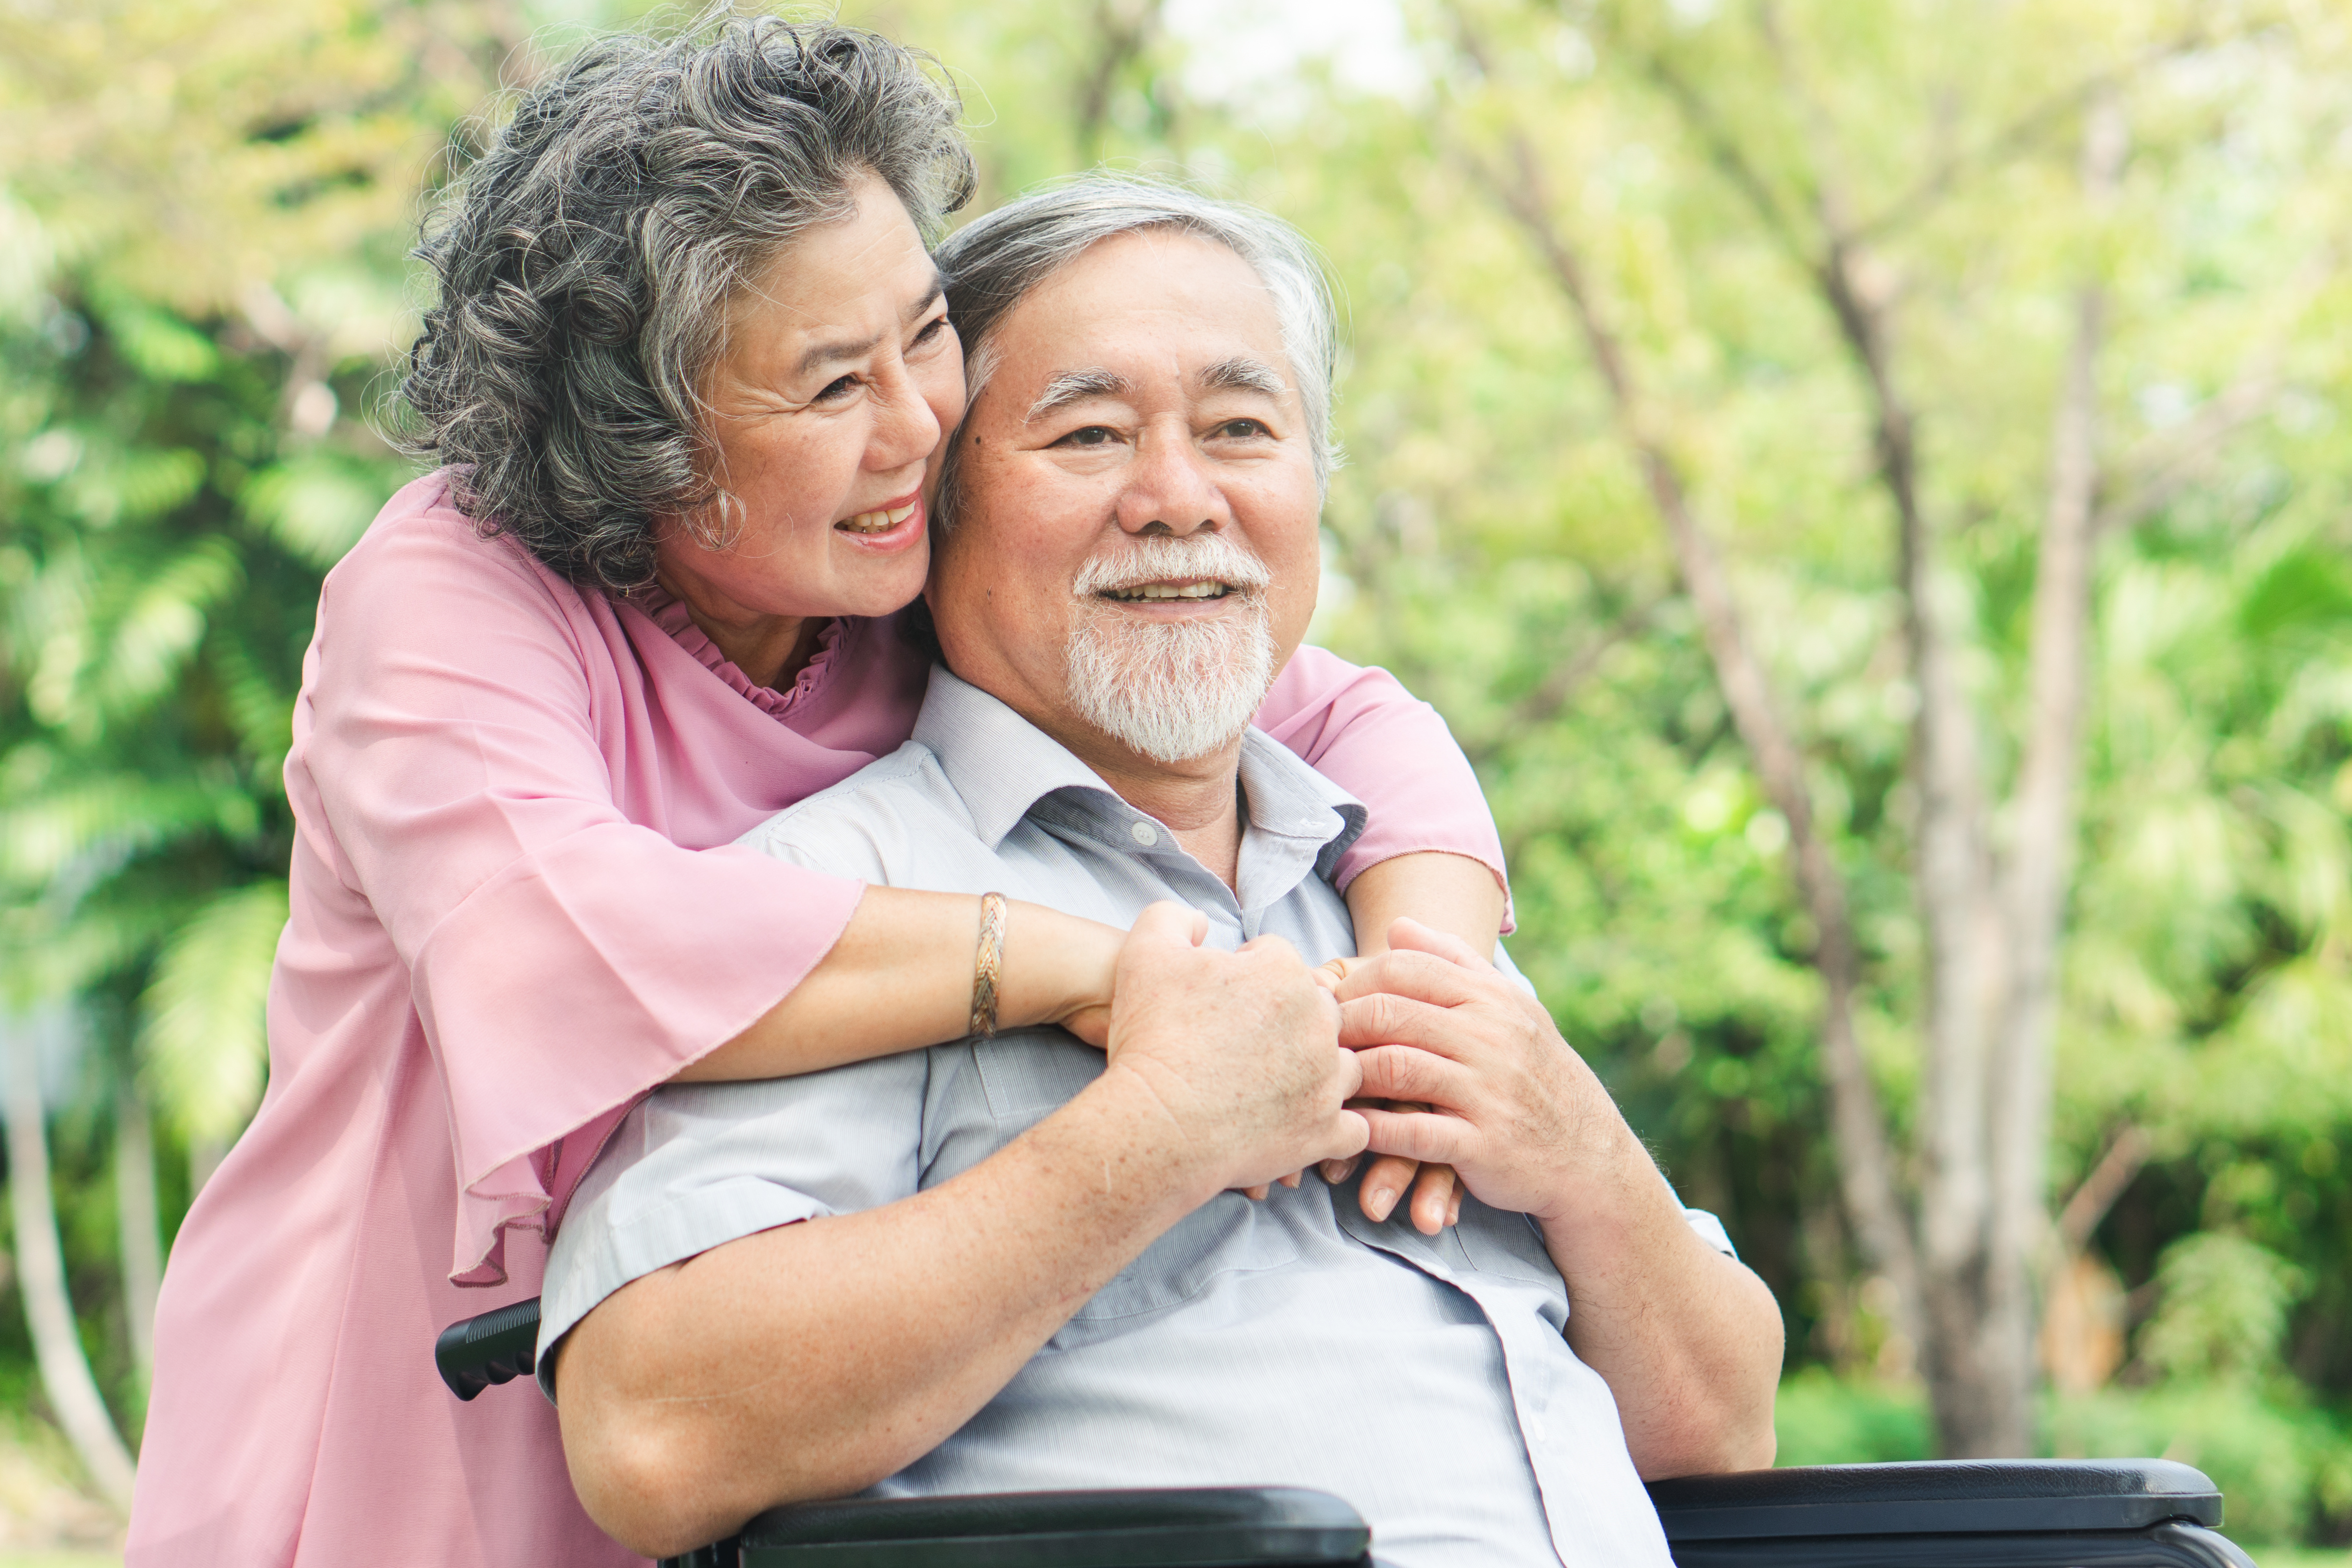 Image of older Asian woman putting her arms around an older Asian man who is sitting in a wheel chair.